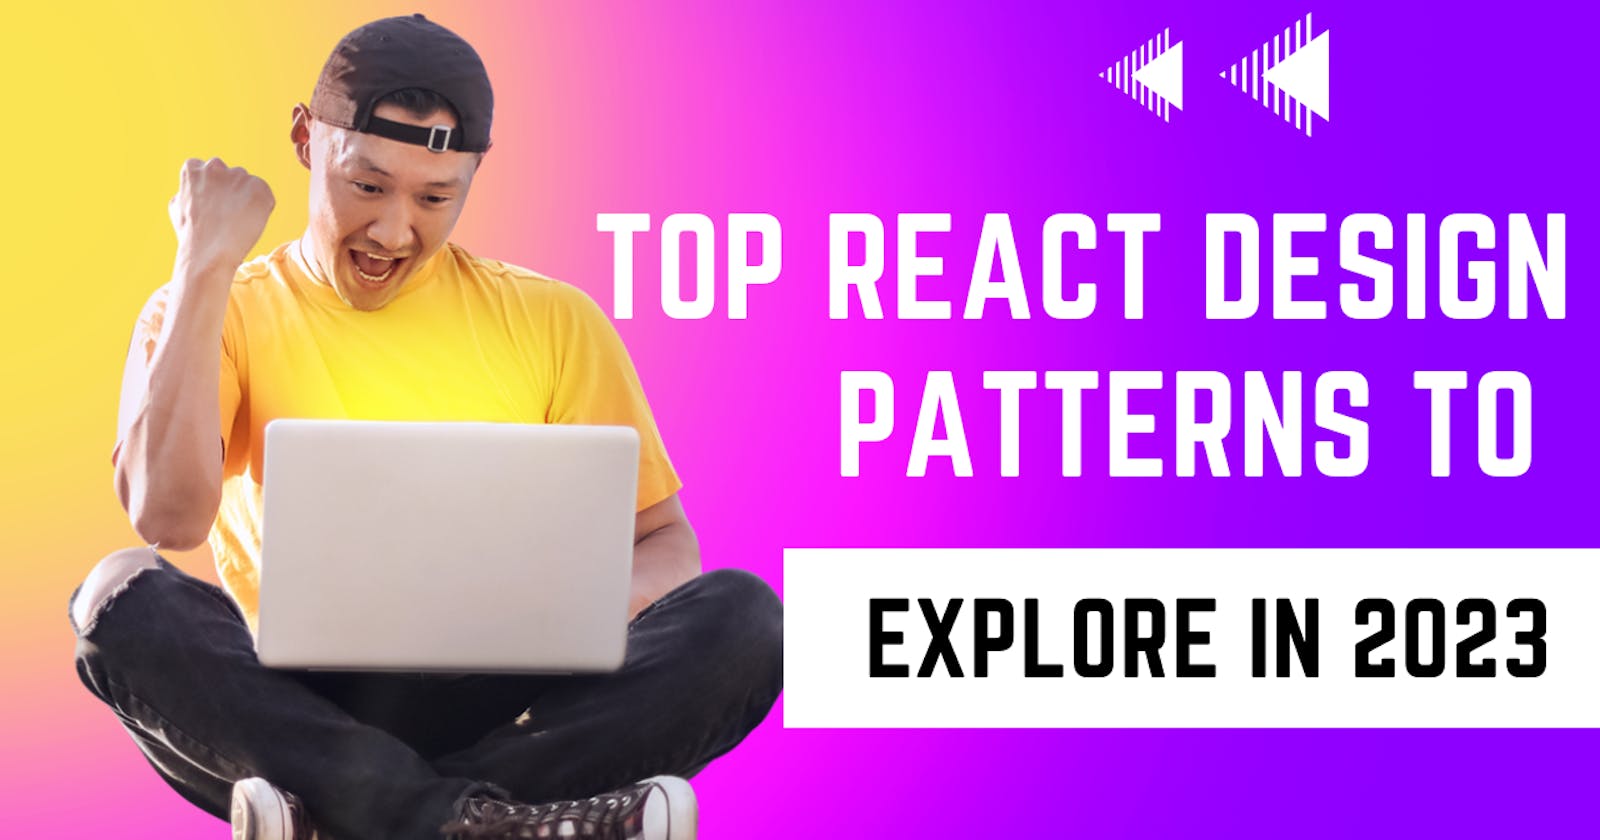 Top React Design Patterns to Explore in 2023